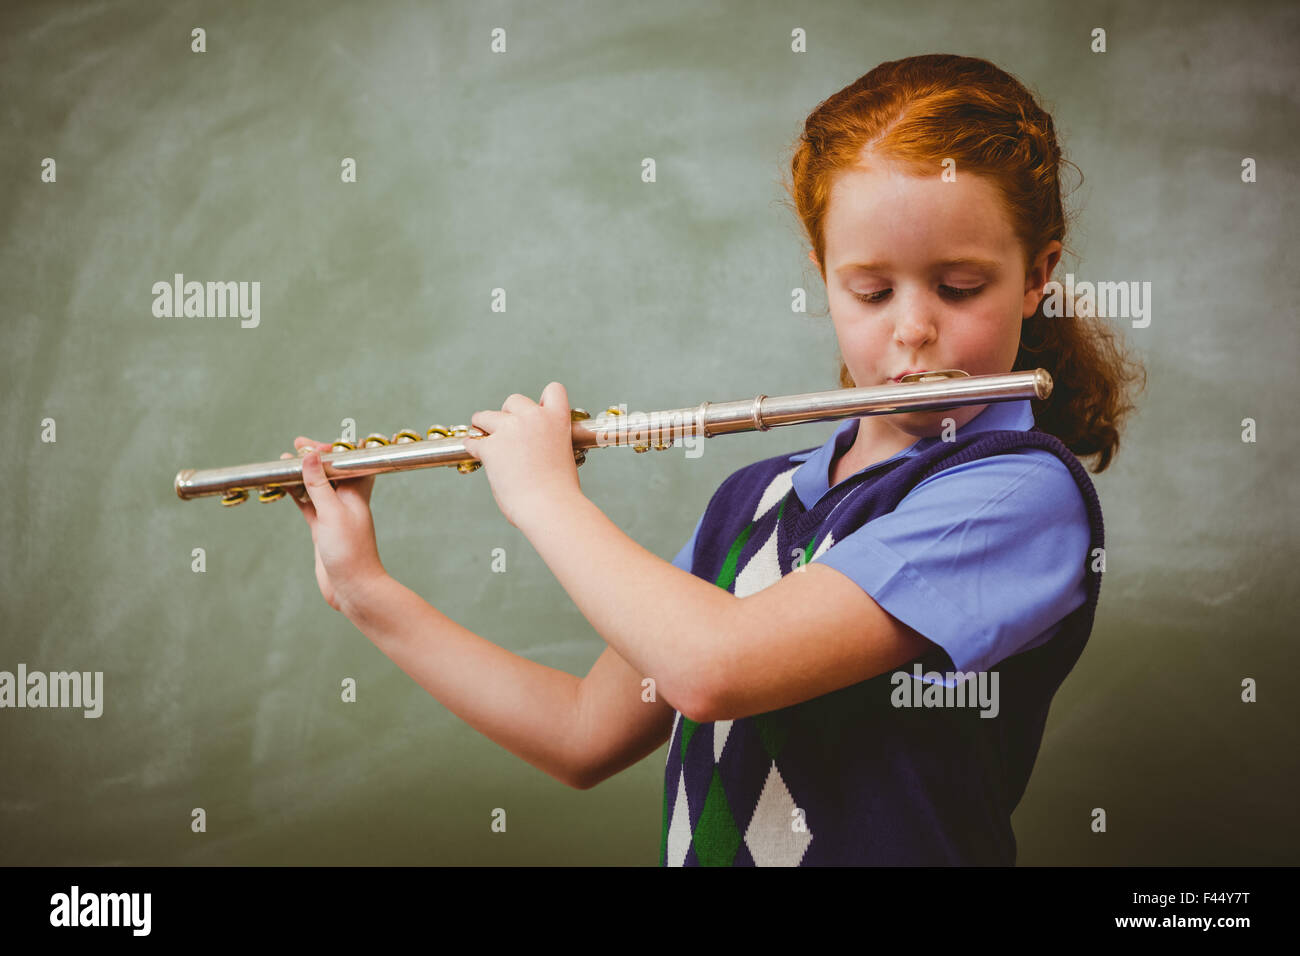 Girl Playing Flute High Resolution Stock Photography and Images - Alamy